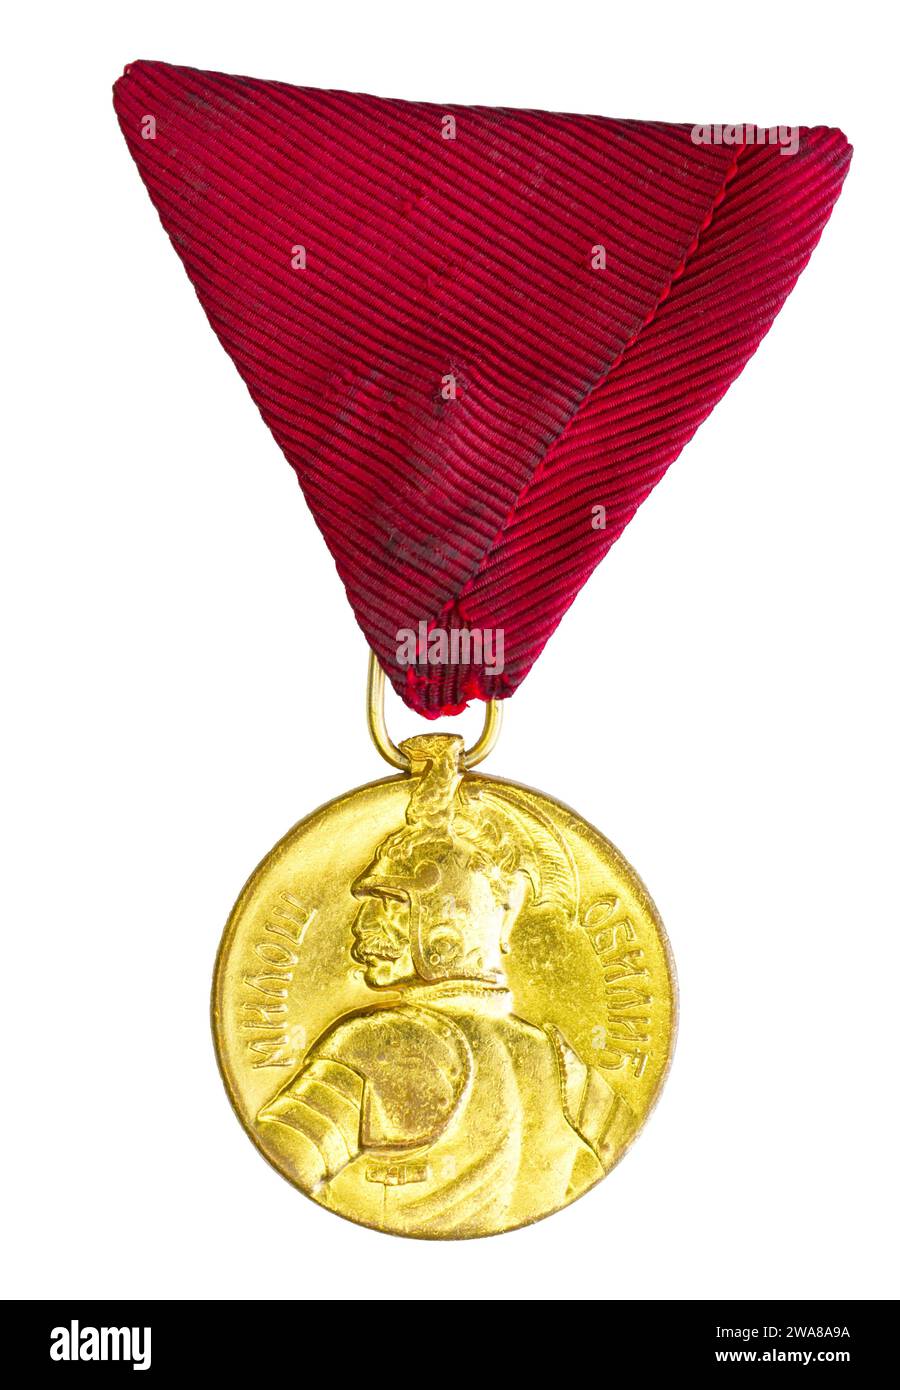 The Serbian gold Medal for Bravery, depicting Miloš Obilić, issued c.1918. Stock Photo